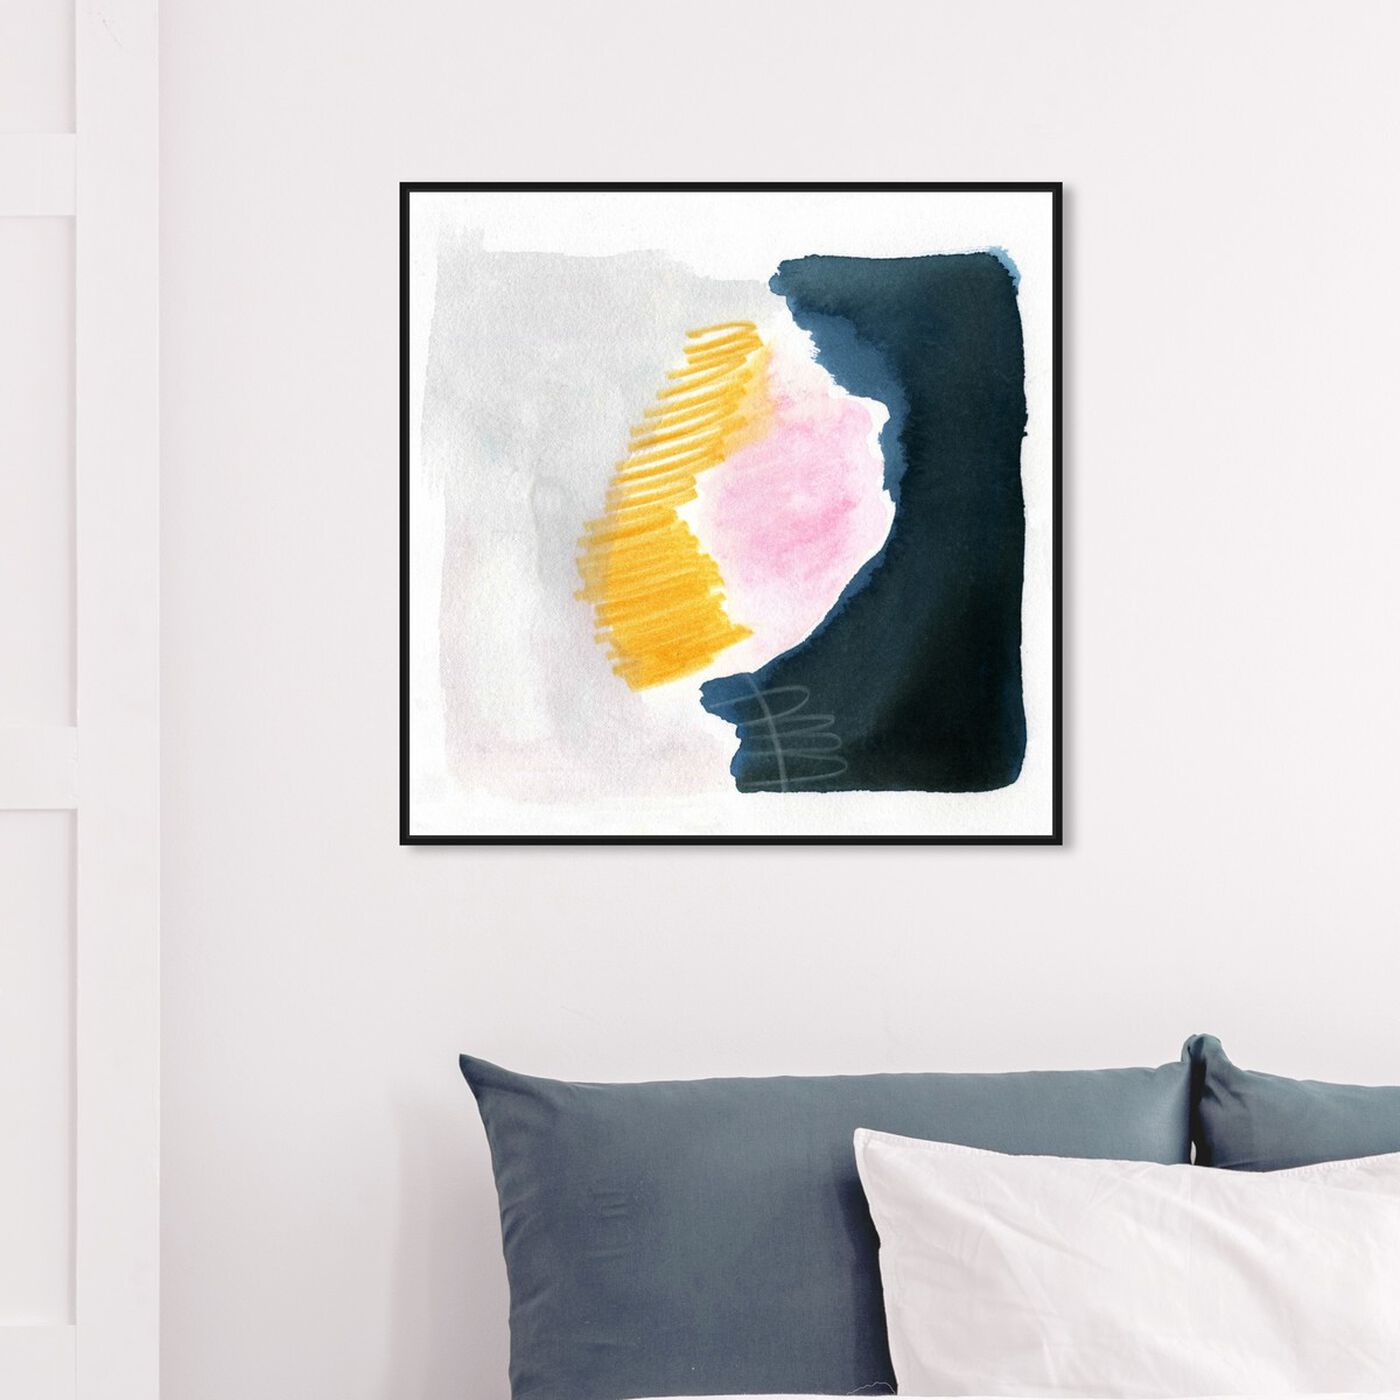 Hanging view of Human featuring abstract and watercolor art.